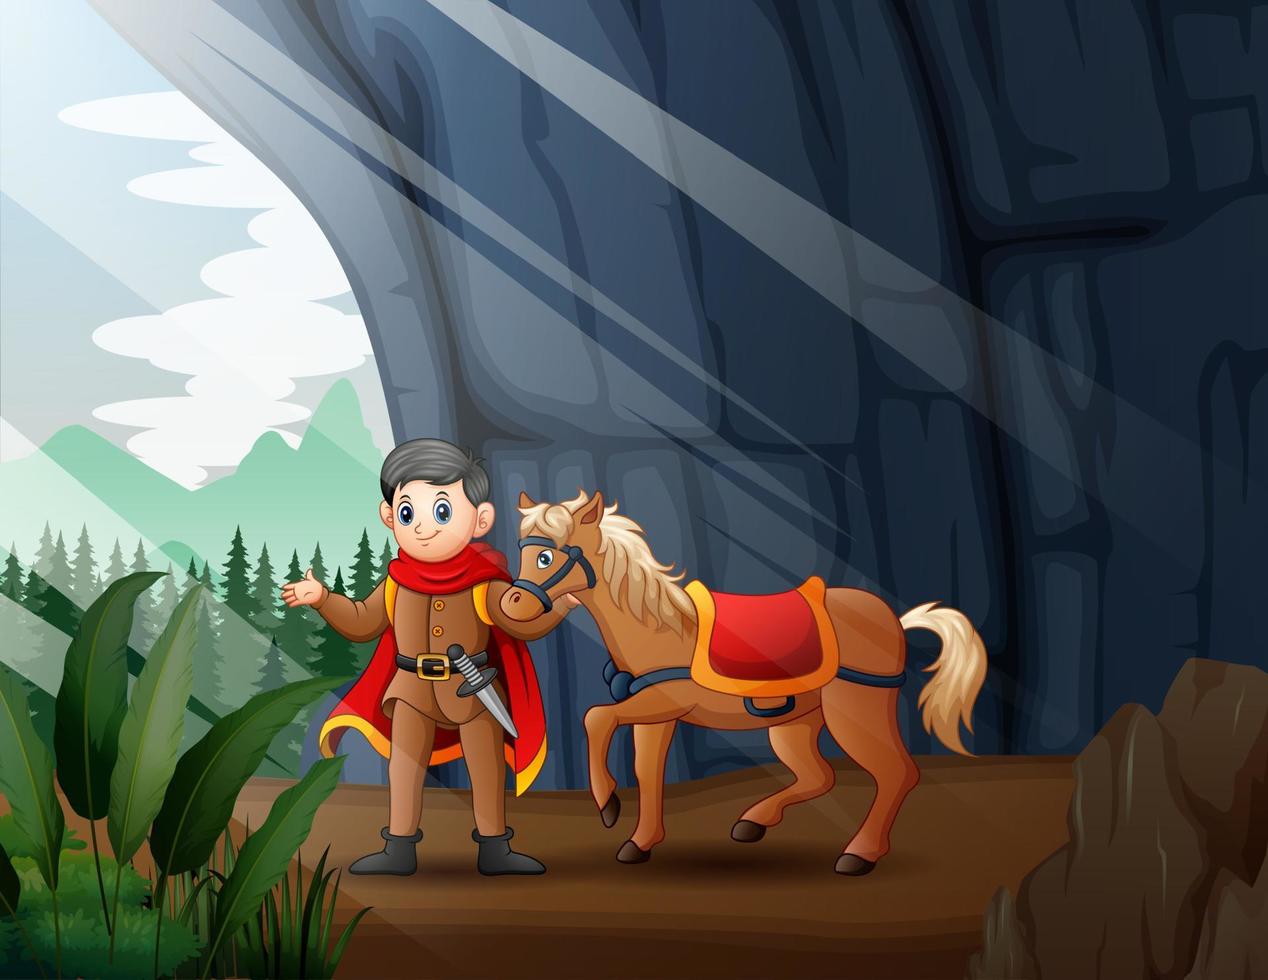 Illustration of a prince and his horse in the cave entrance vector